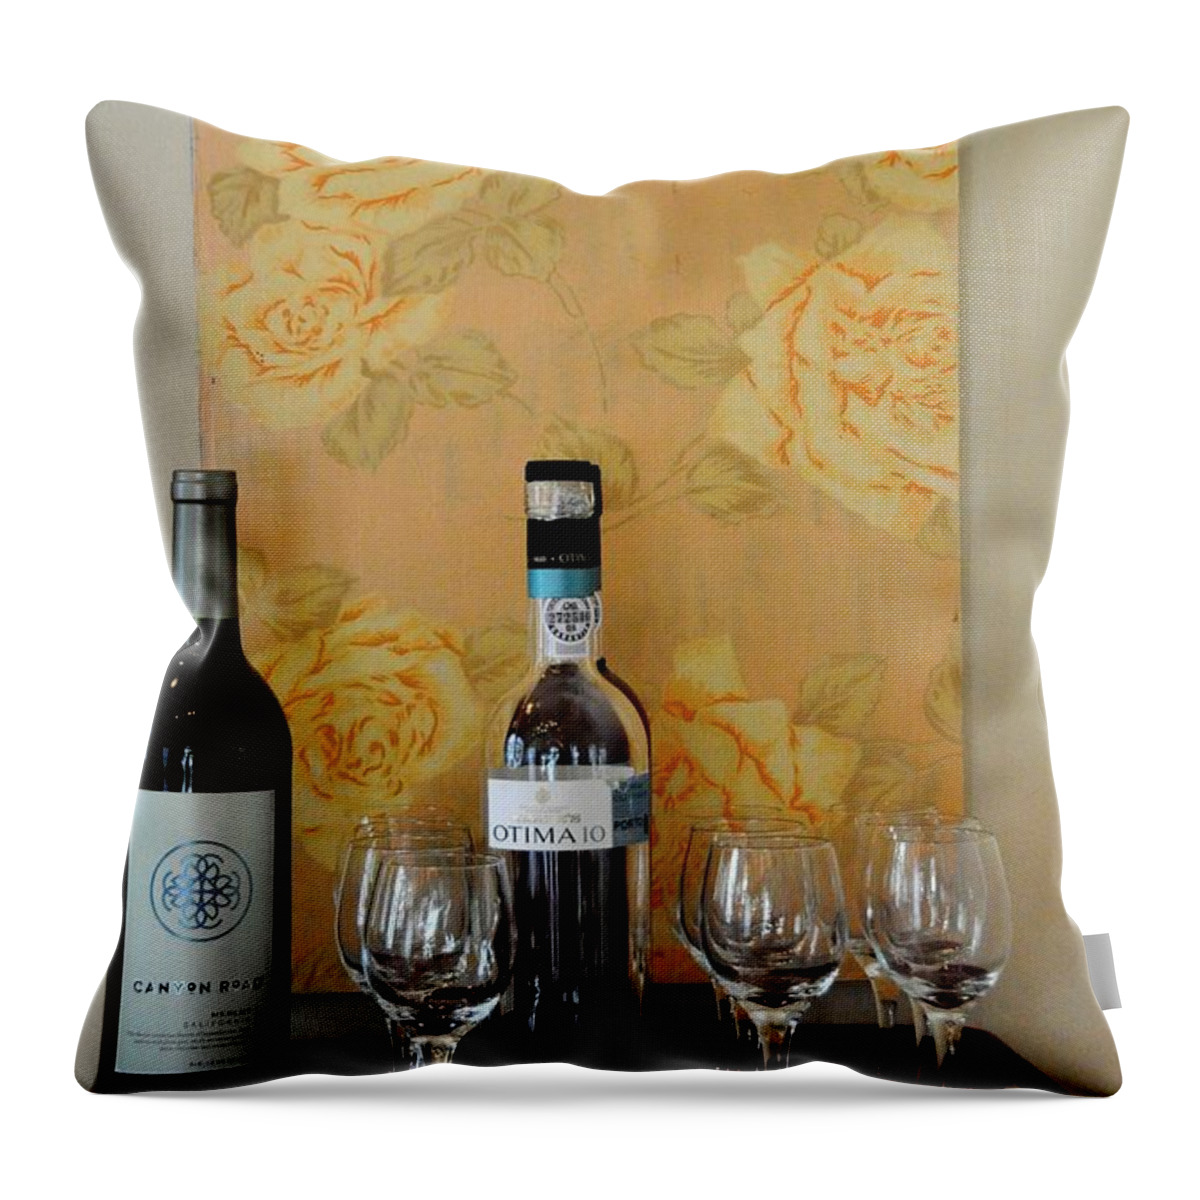 Key West Throw Pillow featuring the photograph Sara Beth's Wine Rack by John Black